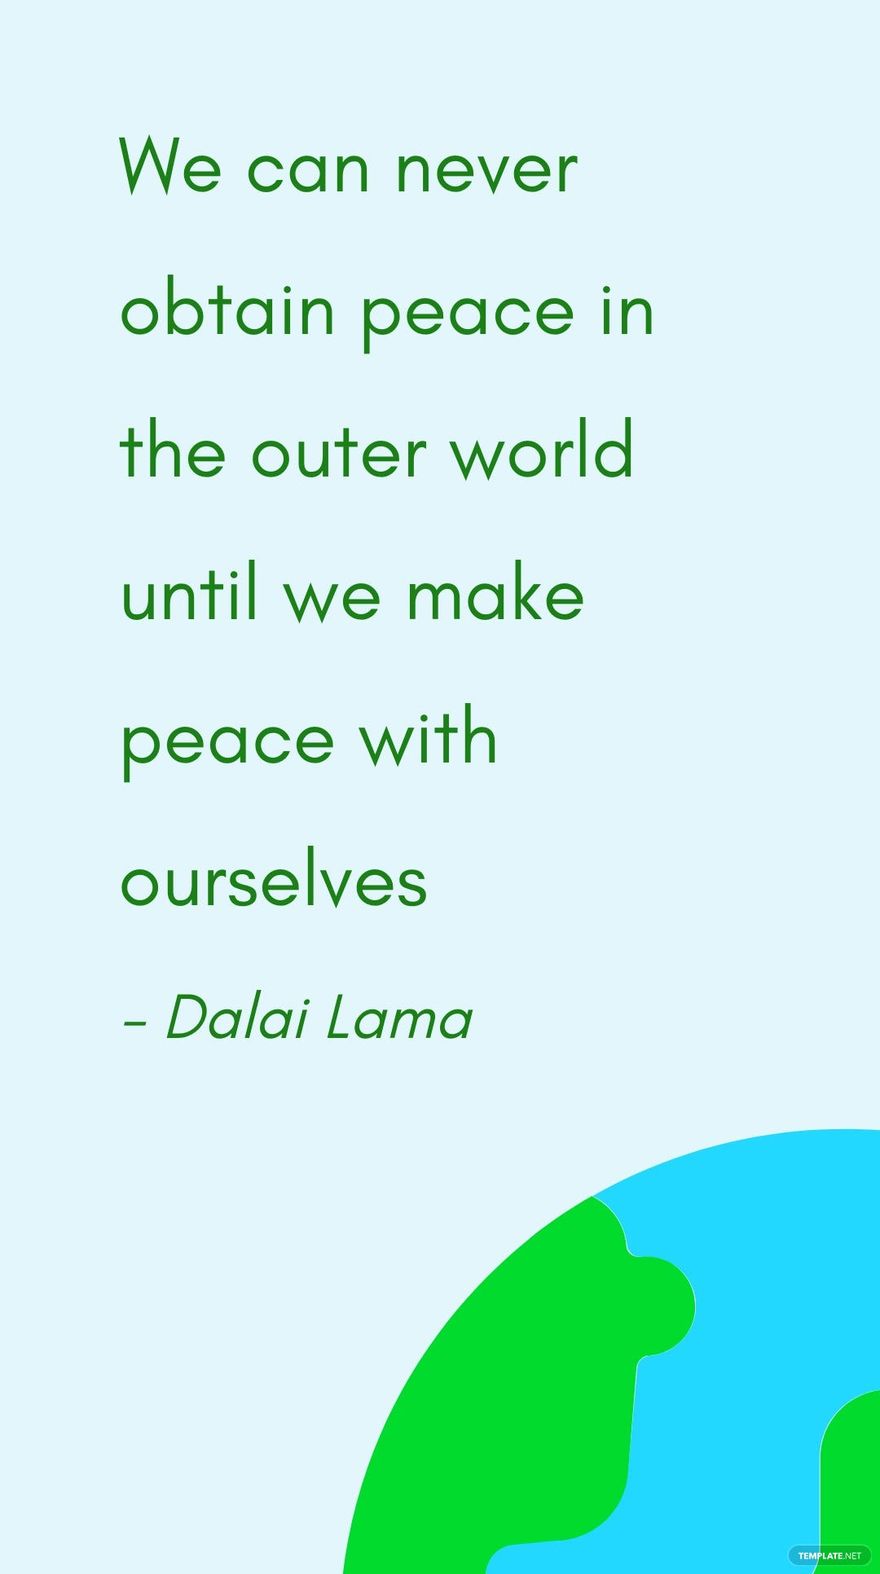 Dalai Lama - We can never obtain peace in the outer world until we make peace with ourselves in JPG